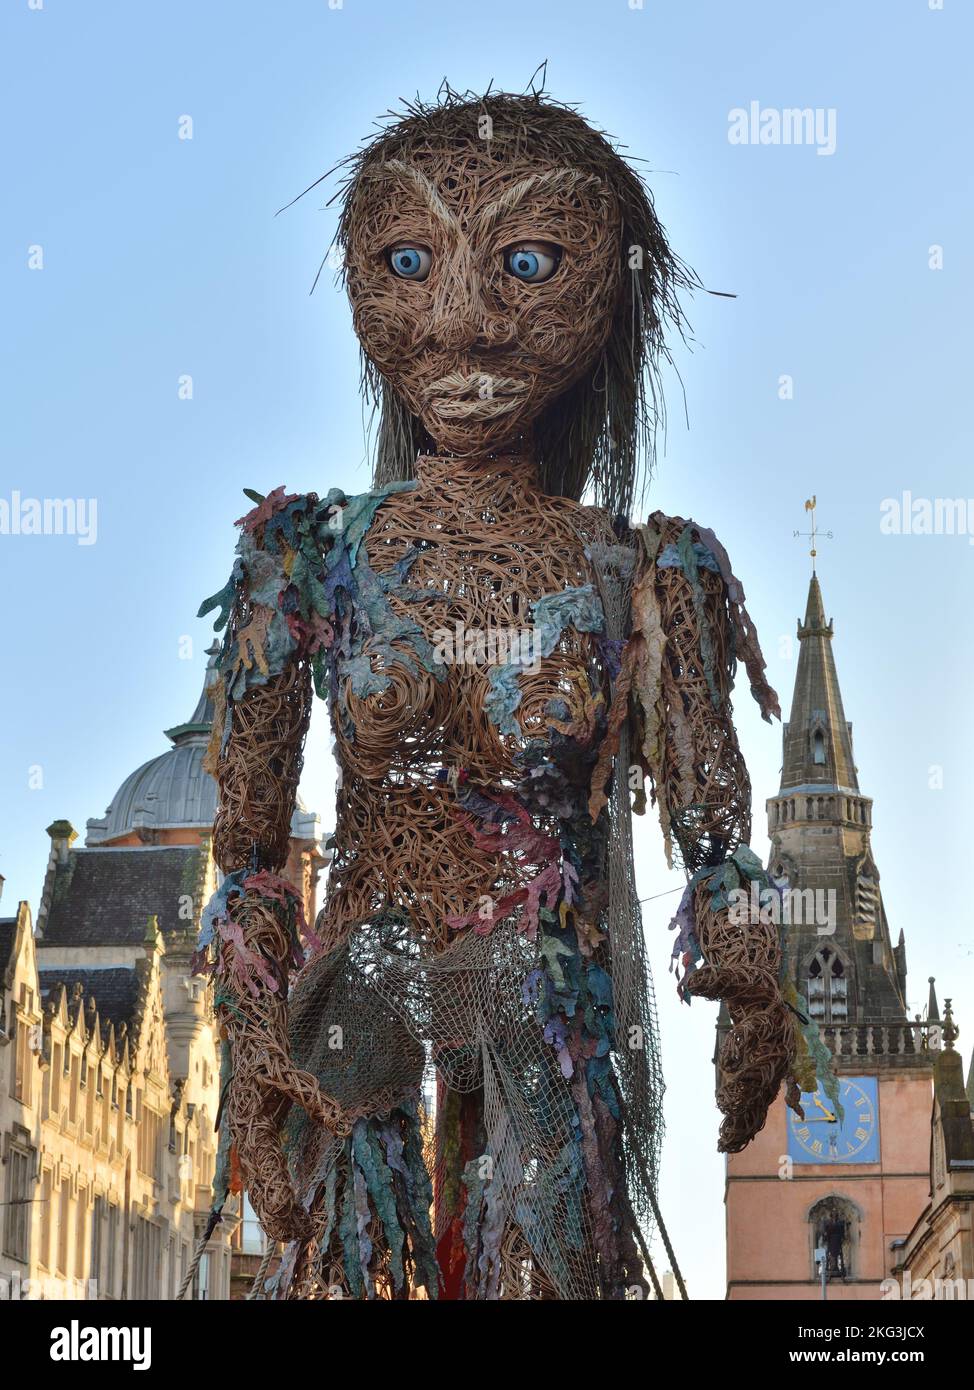 The 10m high giant puppet called 'Storm', by Vision Mechanics, came from the sea to walk the streets of Glasgow city centre at the Trongate, Scotland Stock Photo